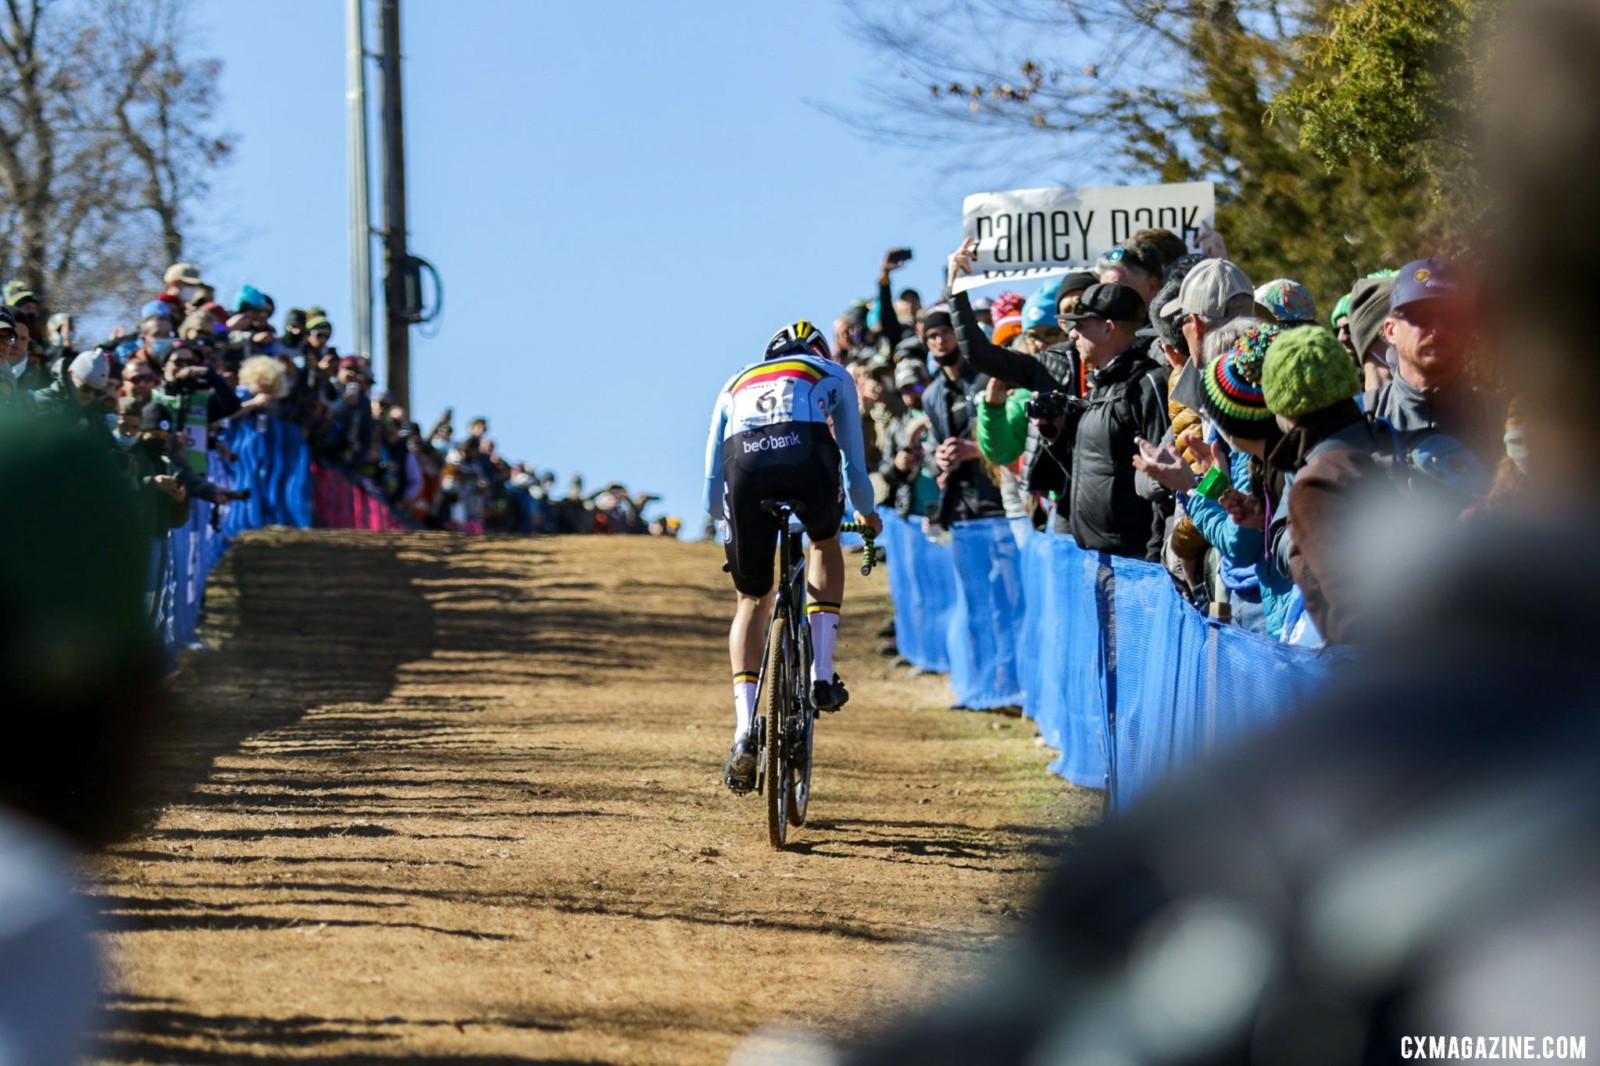 Joran Wyseure takes the U23 Men's title. 2022 Cyclocross World Championships, Fayetteville, Arkansas USA. © D. Mable / Cyclocross Magazine